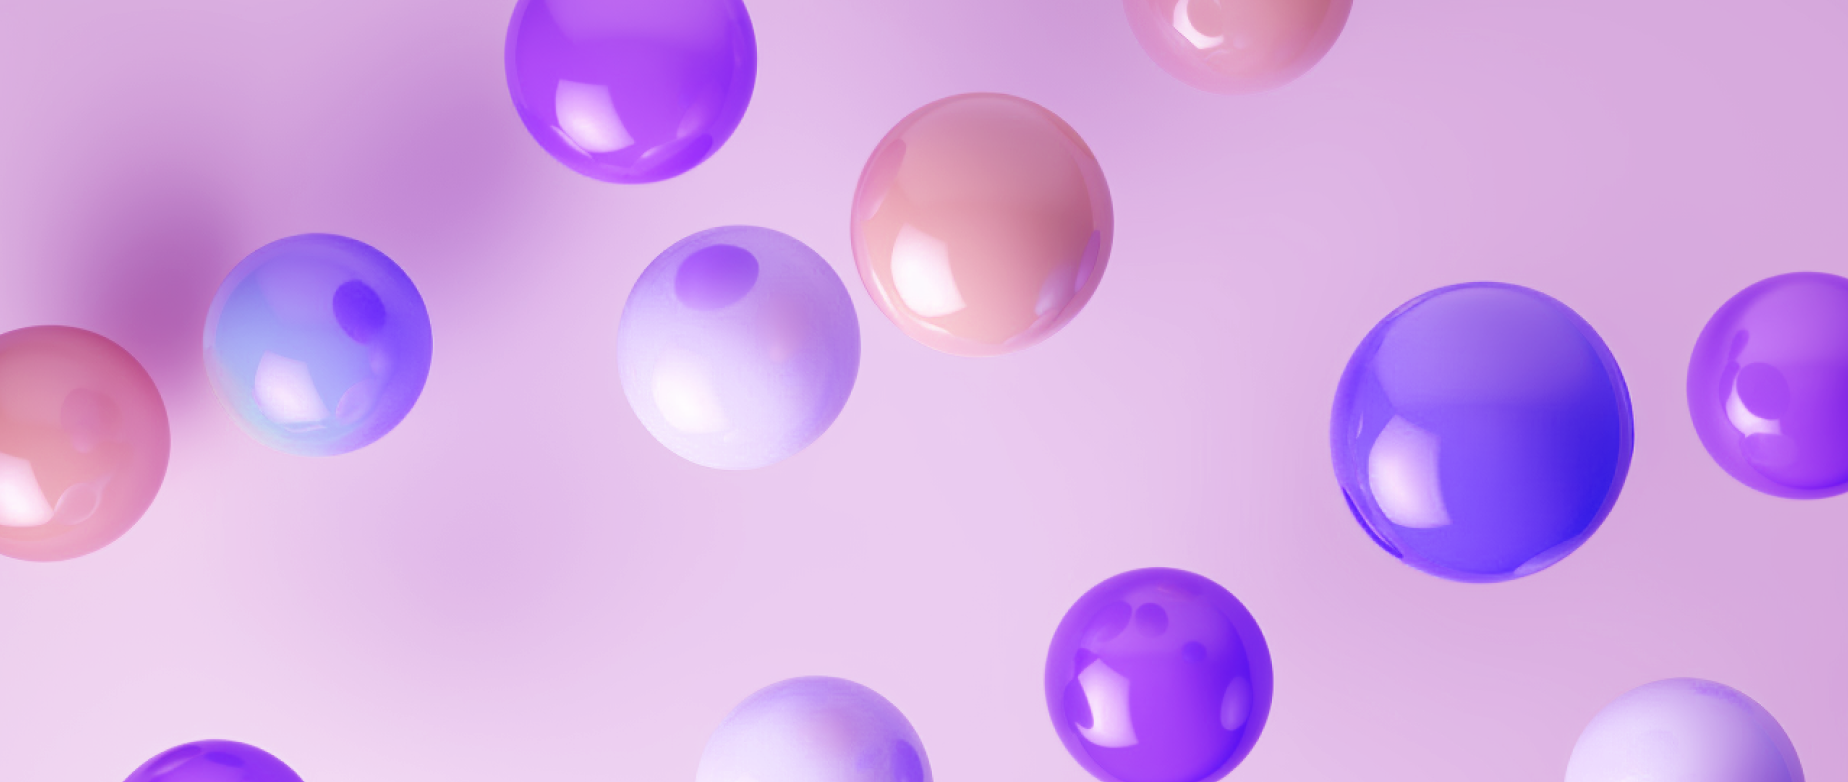 Multicolored balls bouncing on a light purple background.